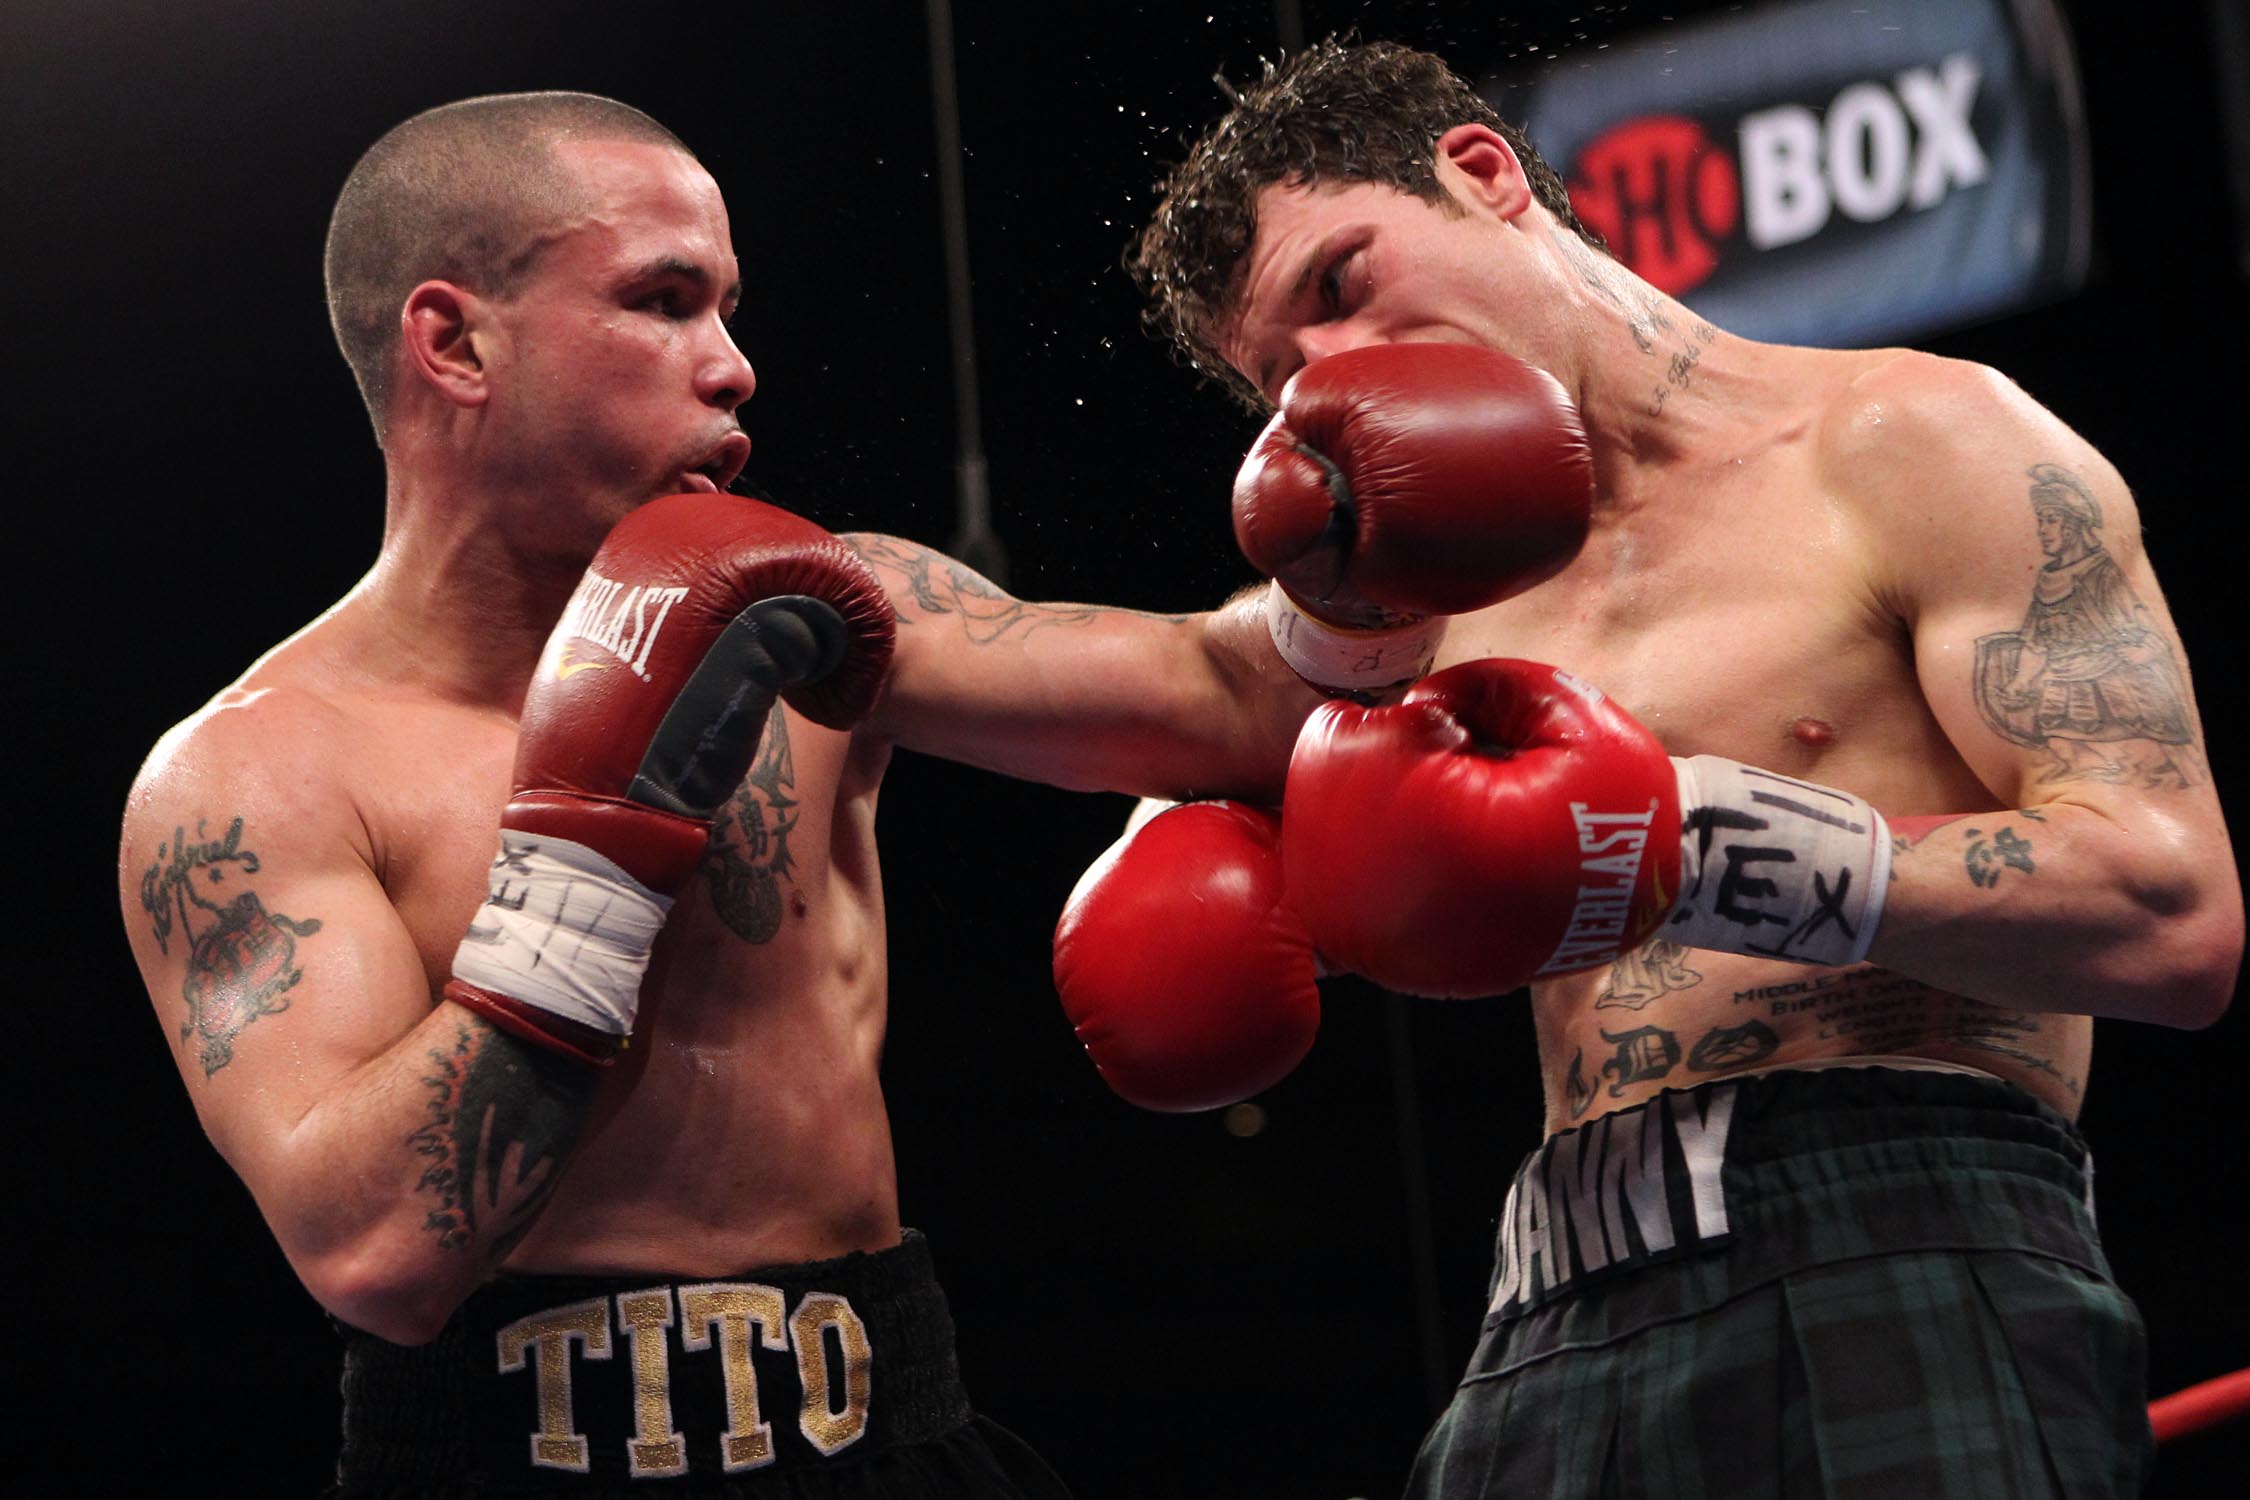 Gabriel Bracero (left) connects with a left hook upstairs on Danny O'Connor in their first bout on April 8, 2011, a unanimous decision win for Bracero. They meet again on Oct. 10, 2015. Photo credit: Tom Casino/Showtime